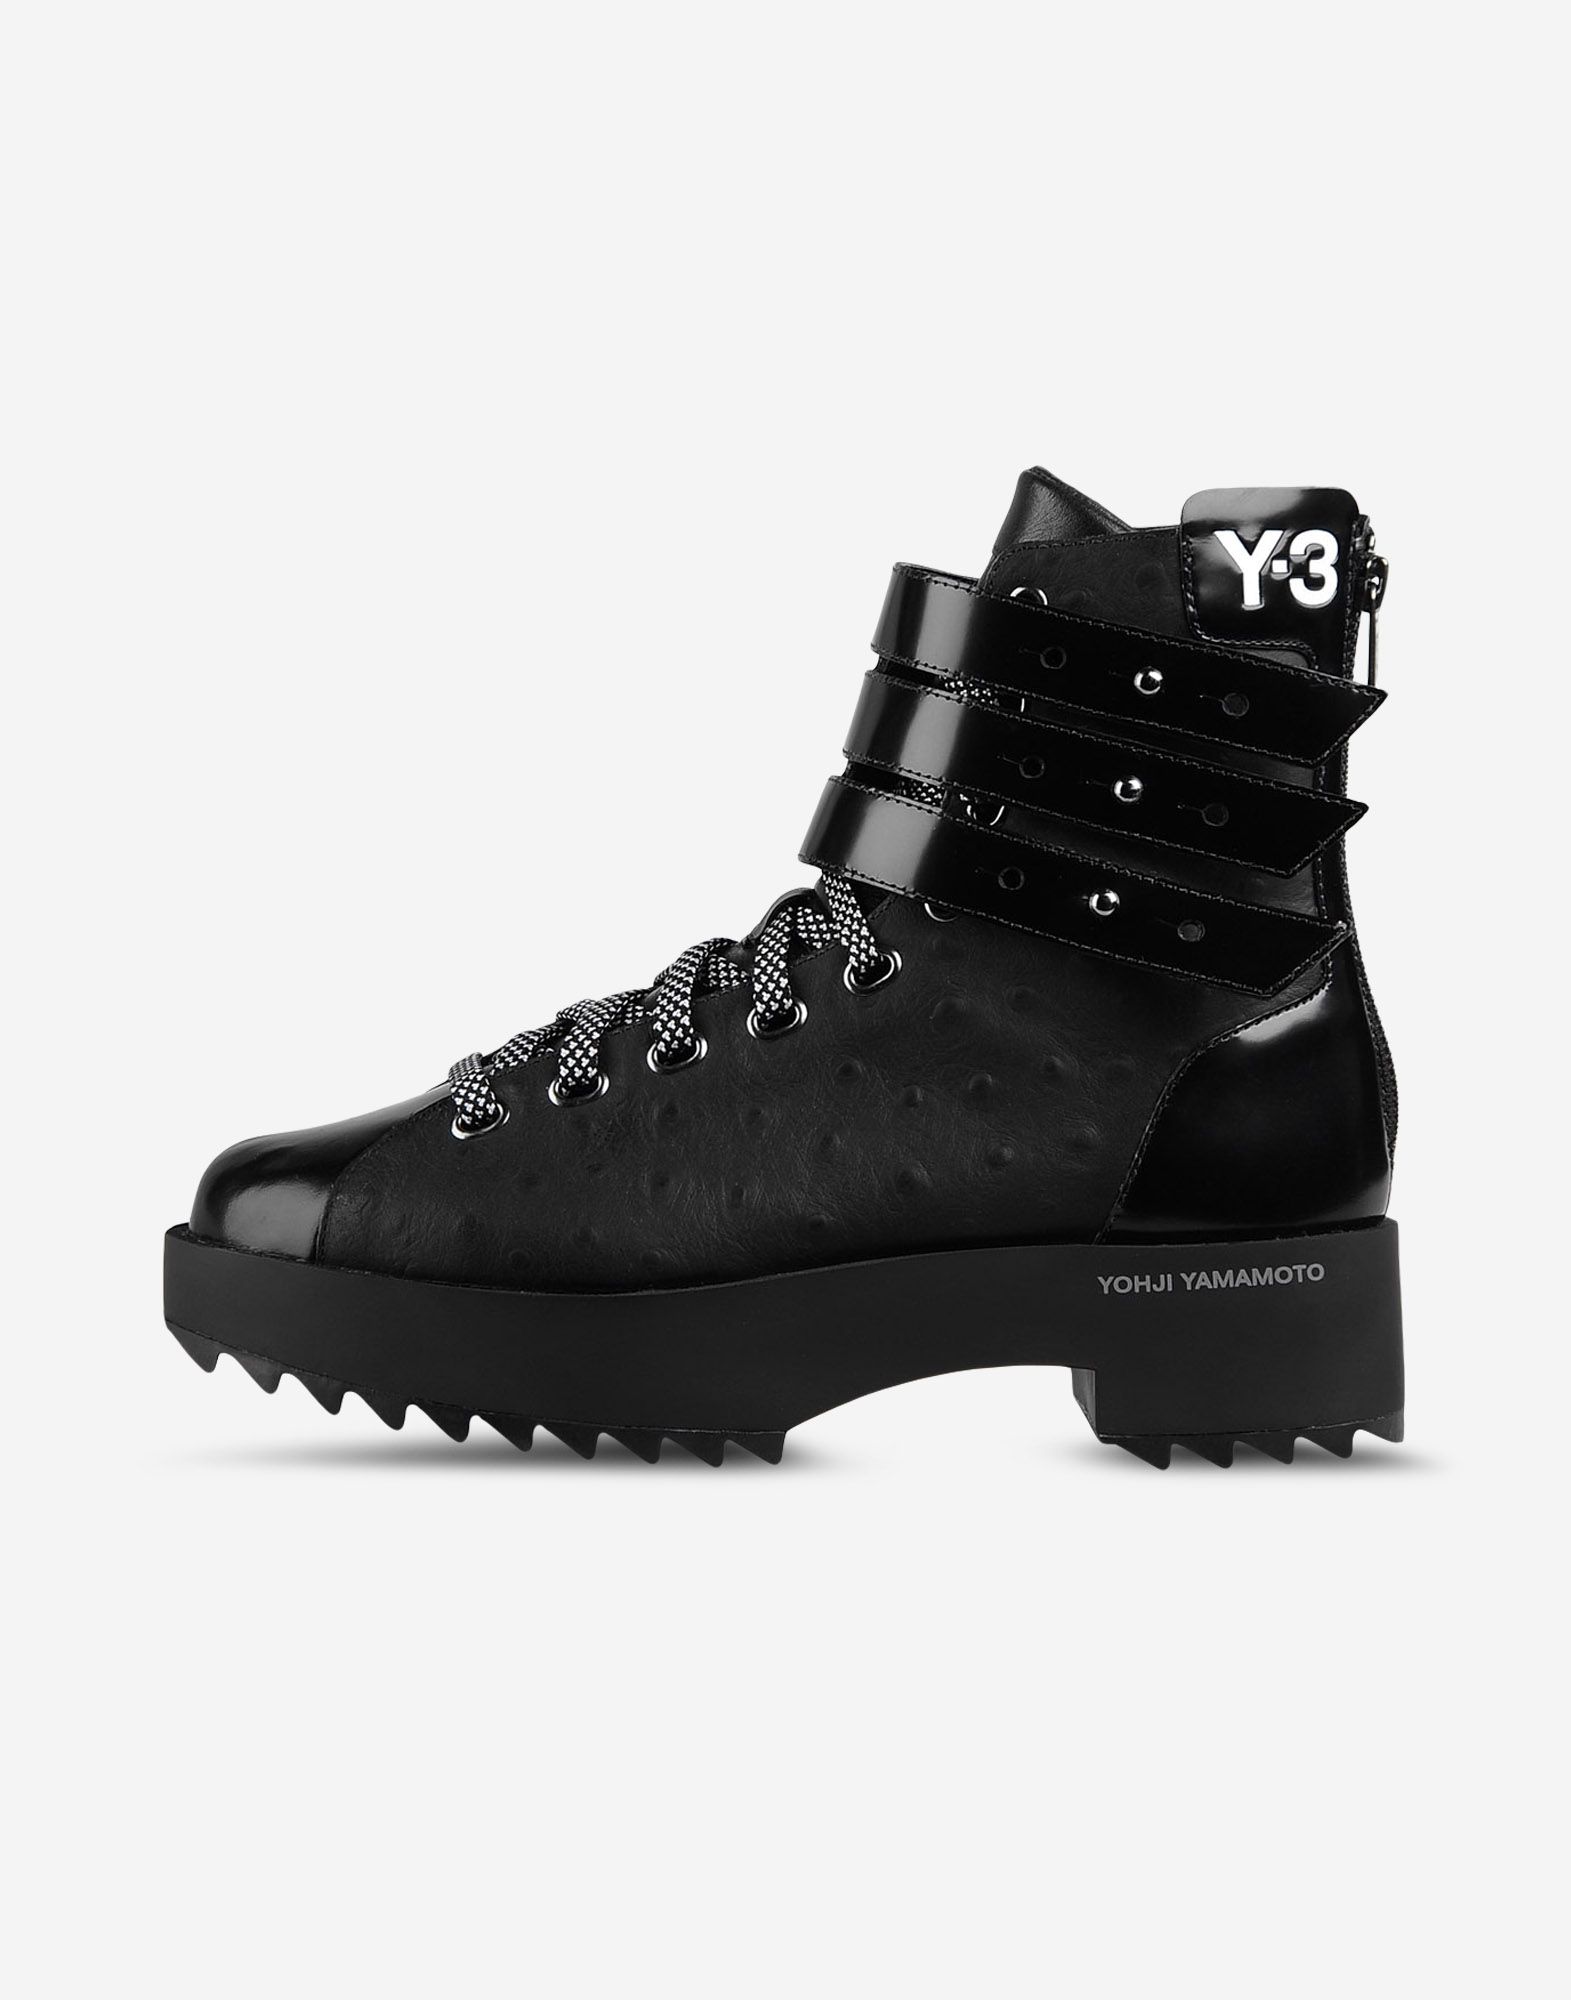 Y 3 Hike Star II for Women | Adidas Y-3 Official Store